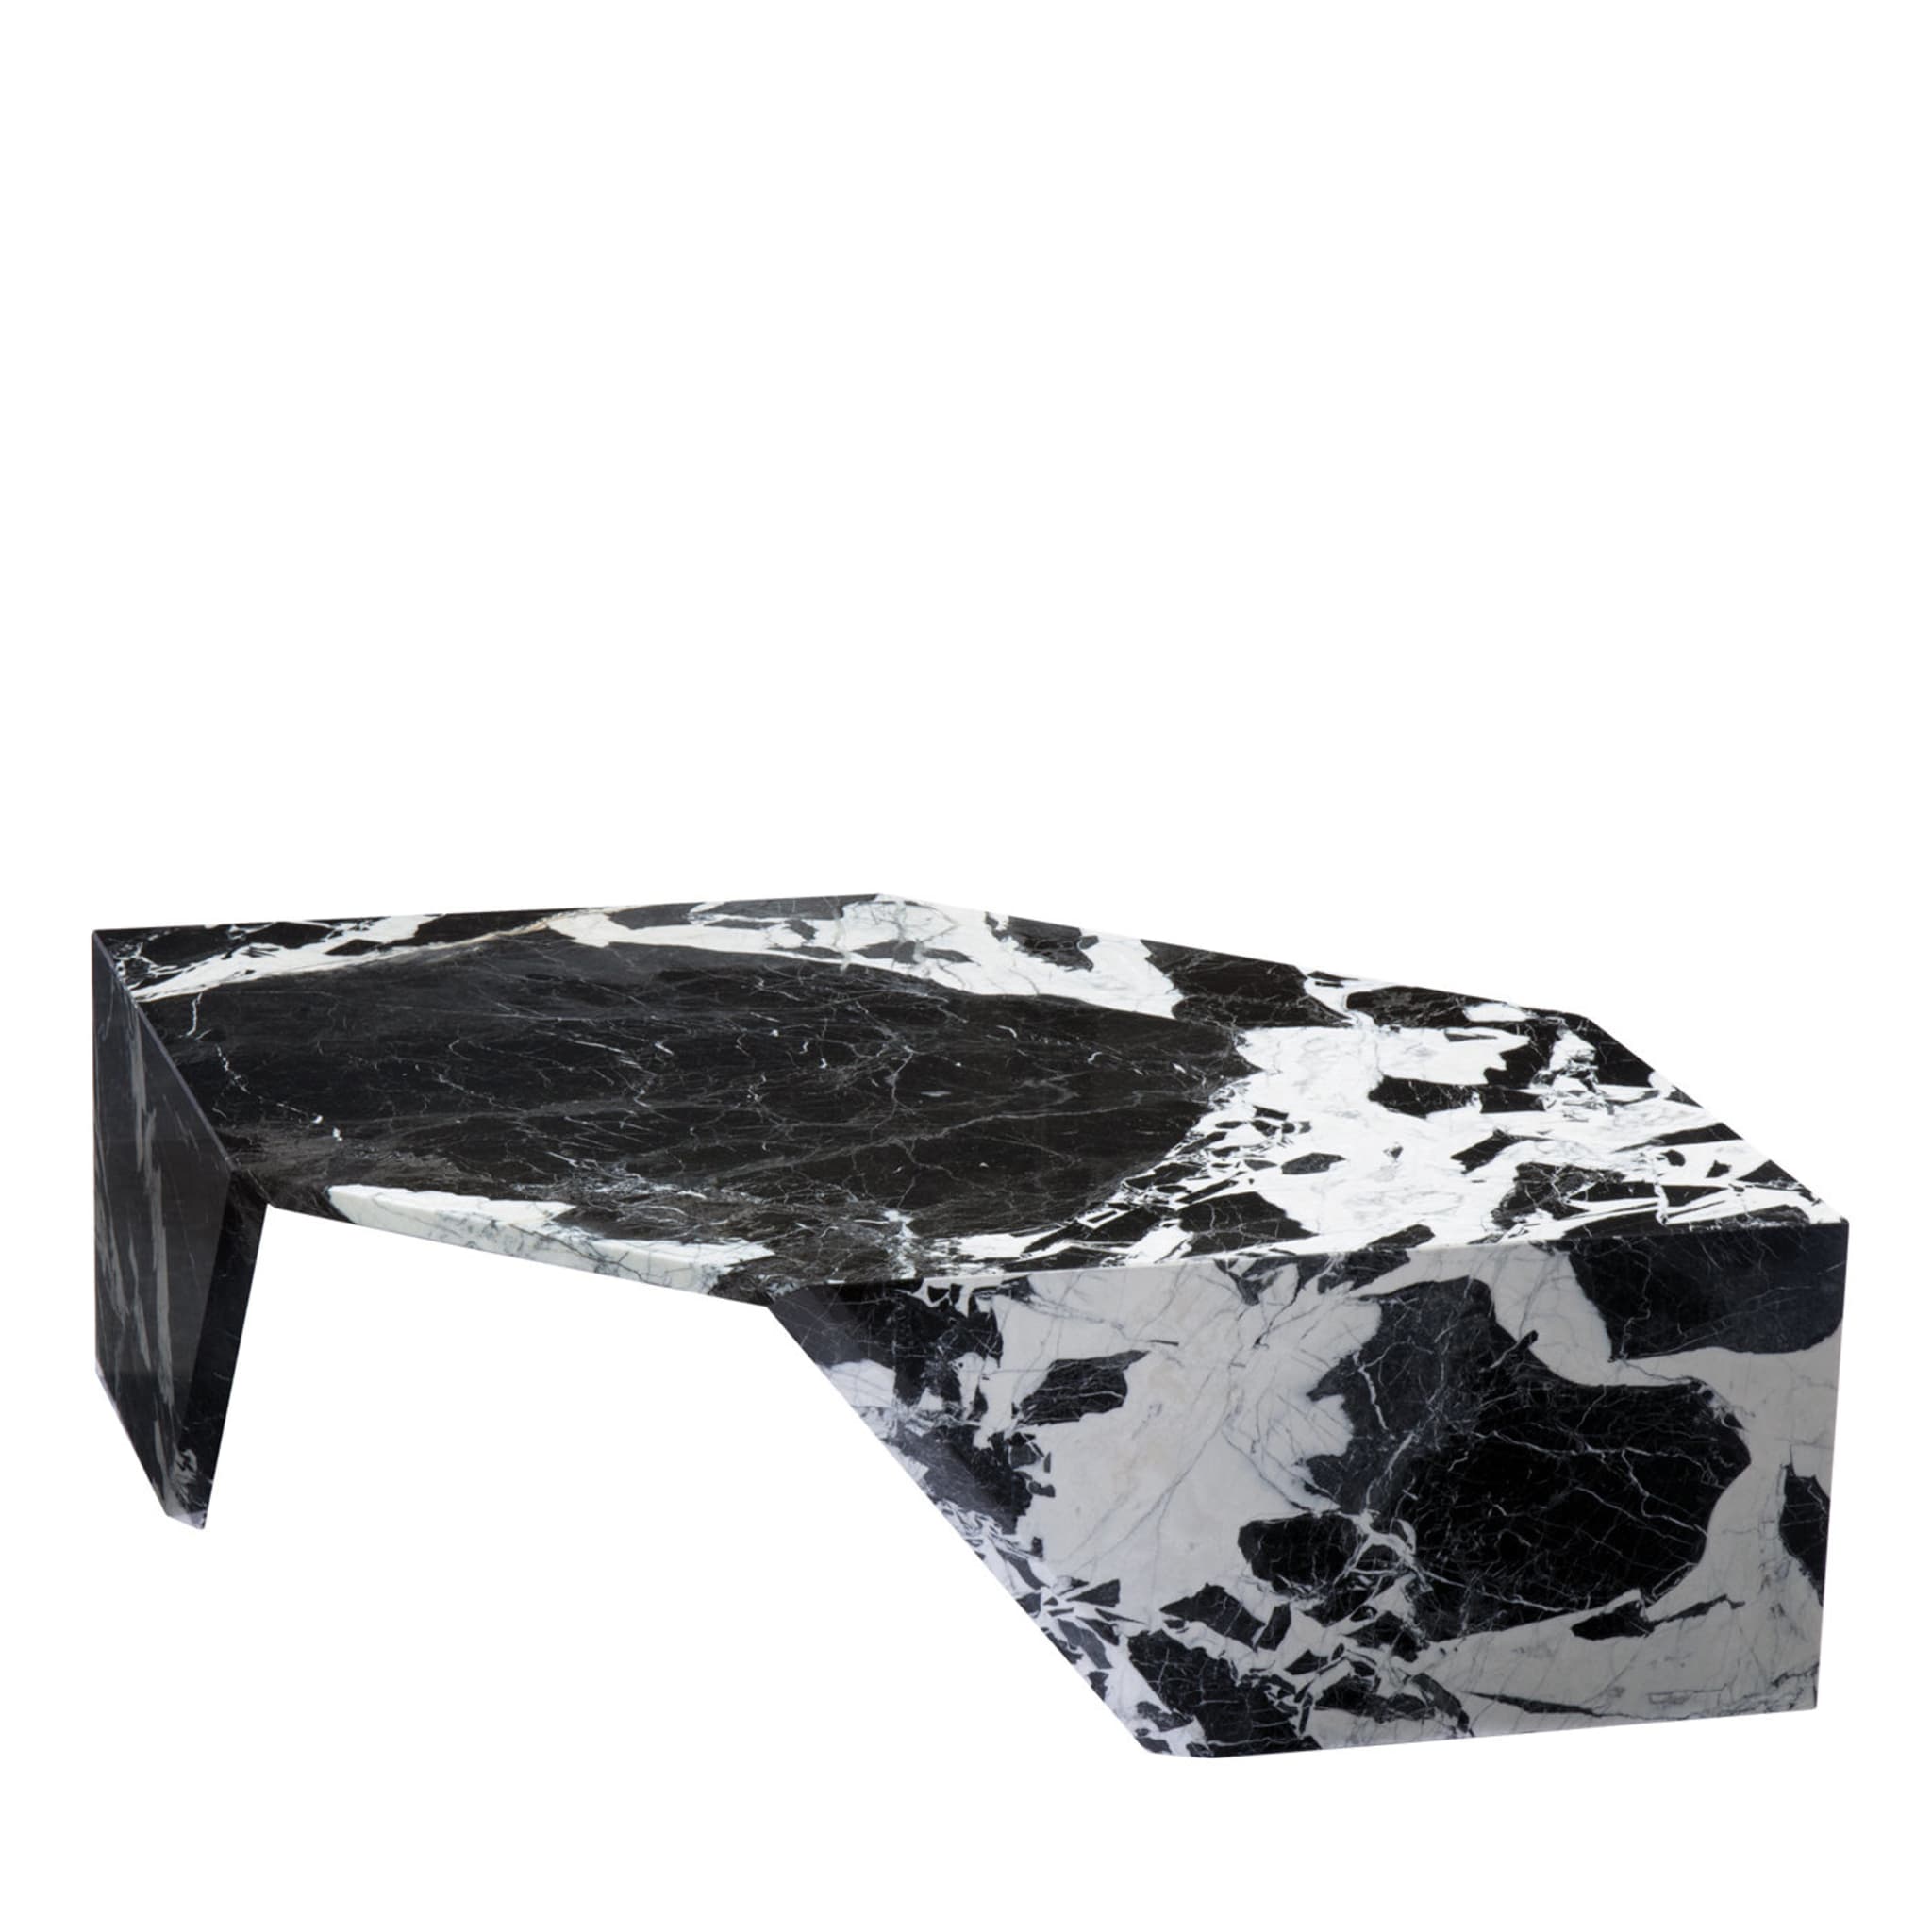 Black and White Origami Coffee Table by Patricia Urquiola - Main view